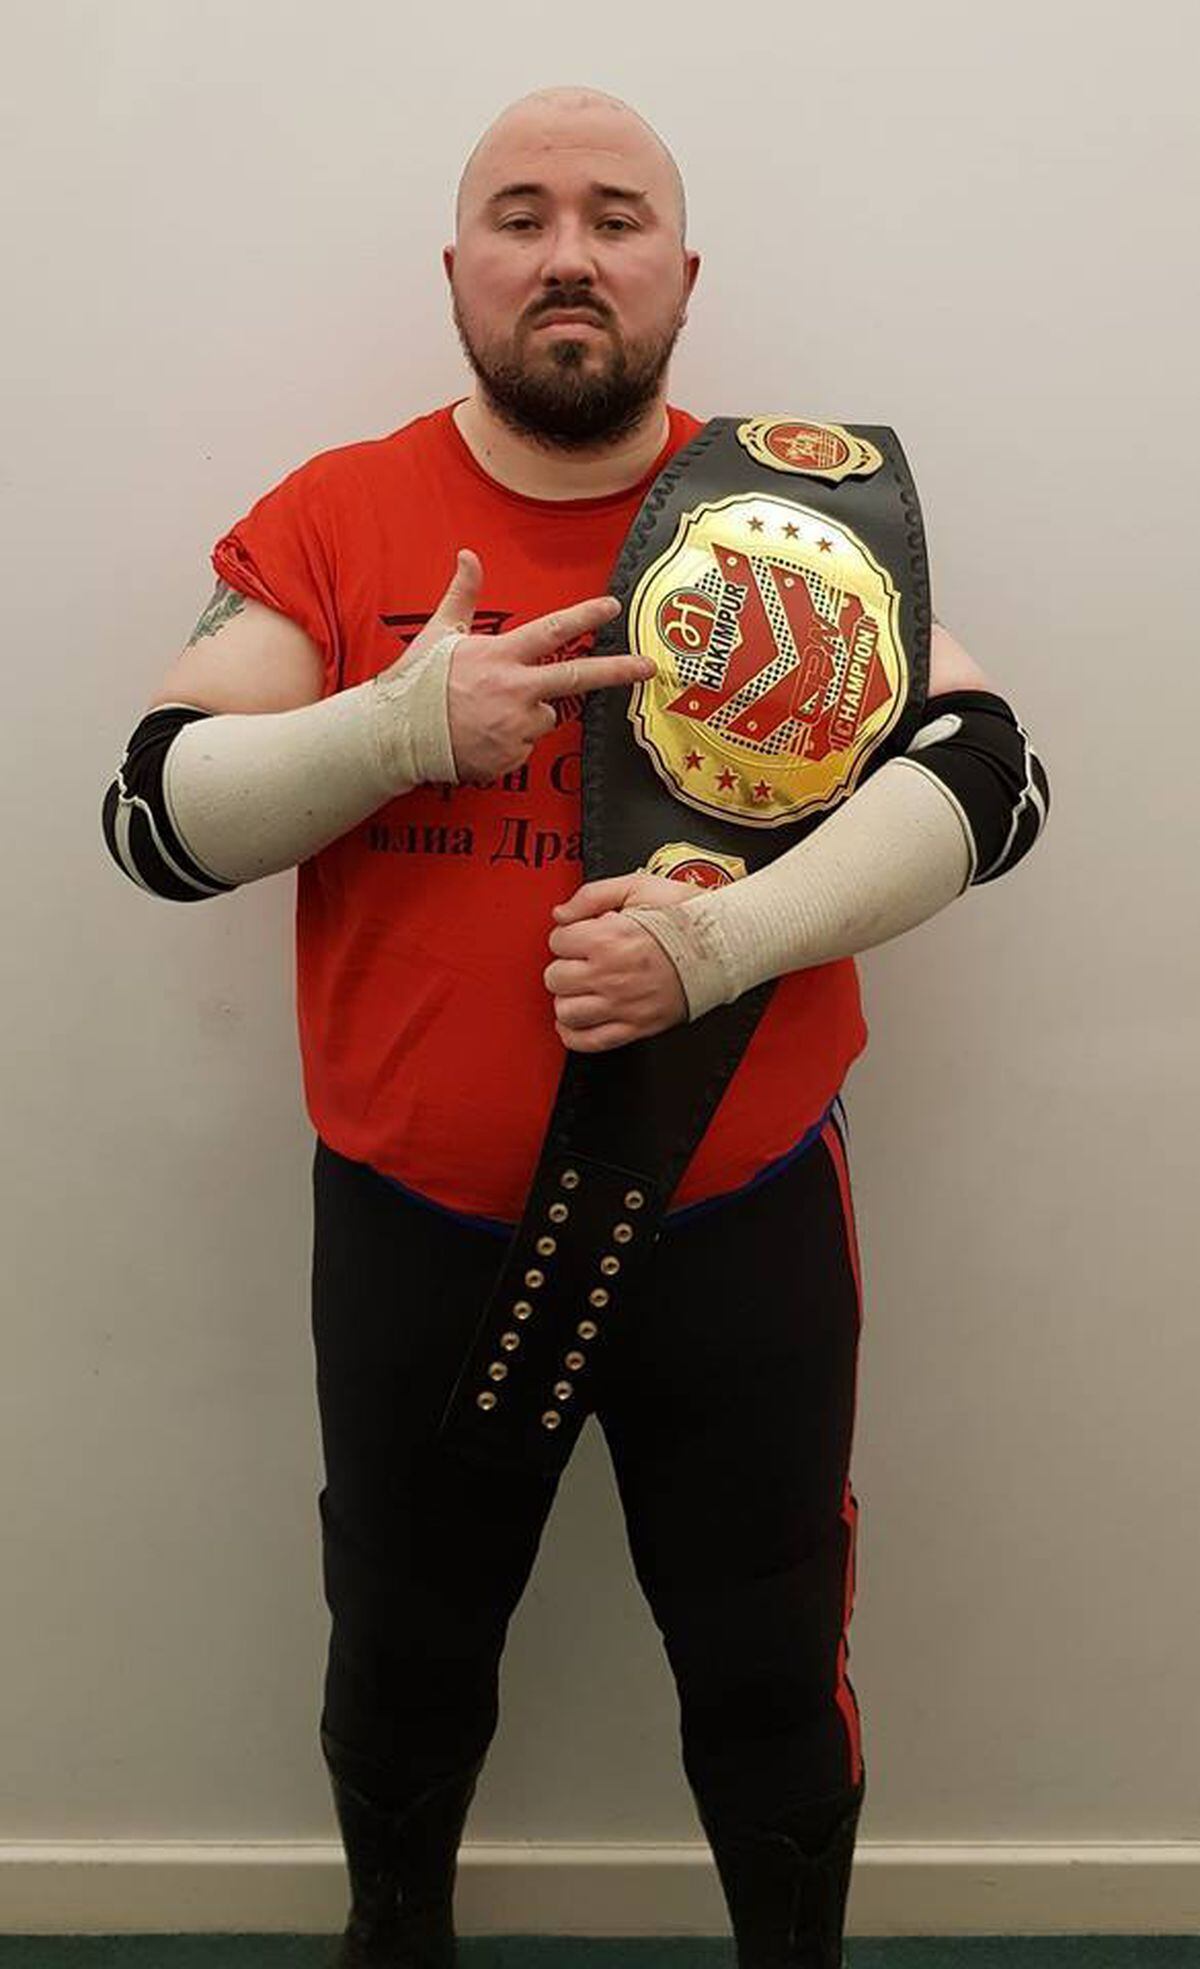 James also embraces his heritage as part of his wrestling persona, 'The Iron Serb'